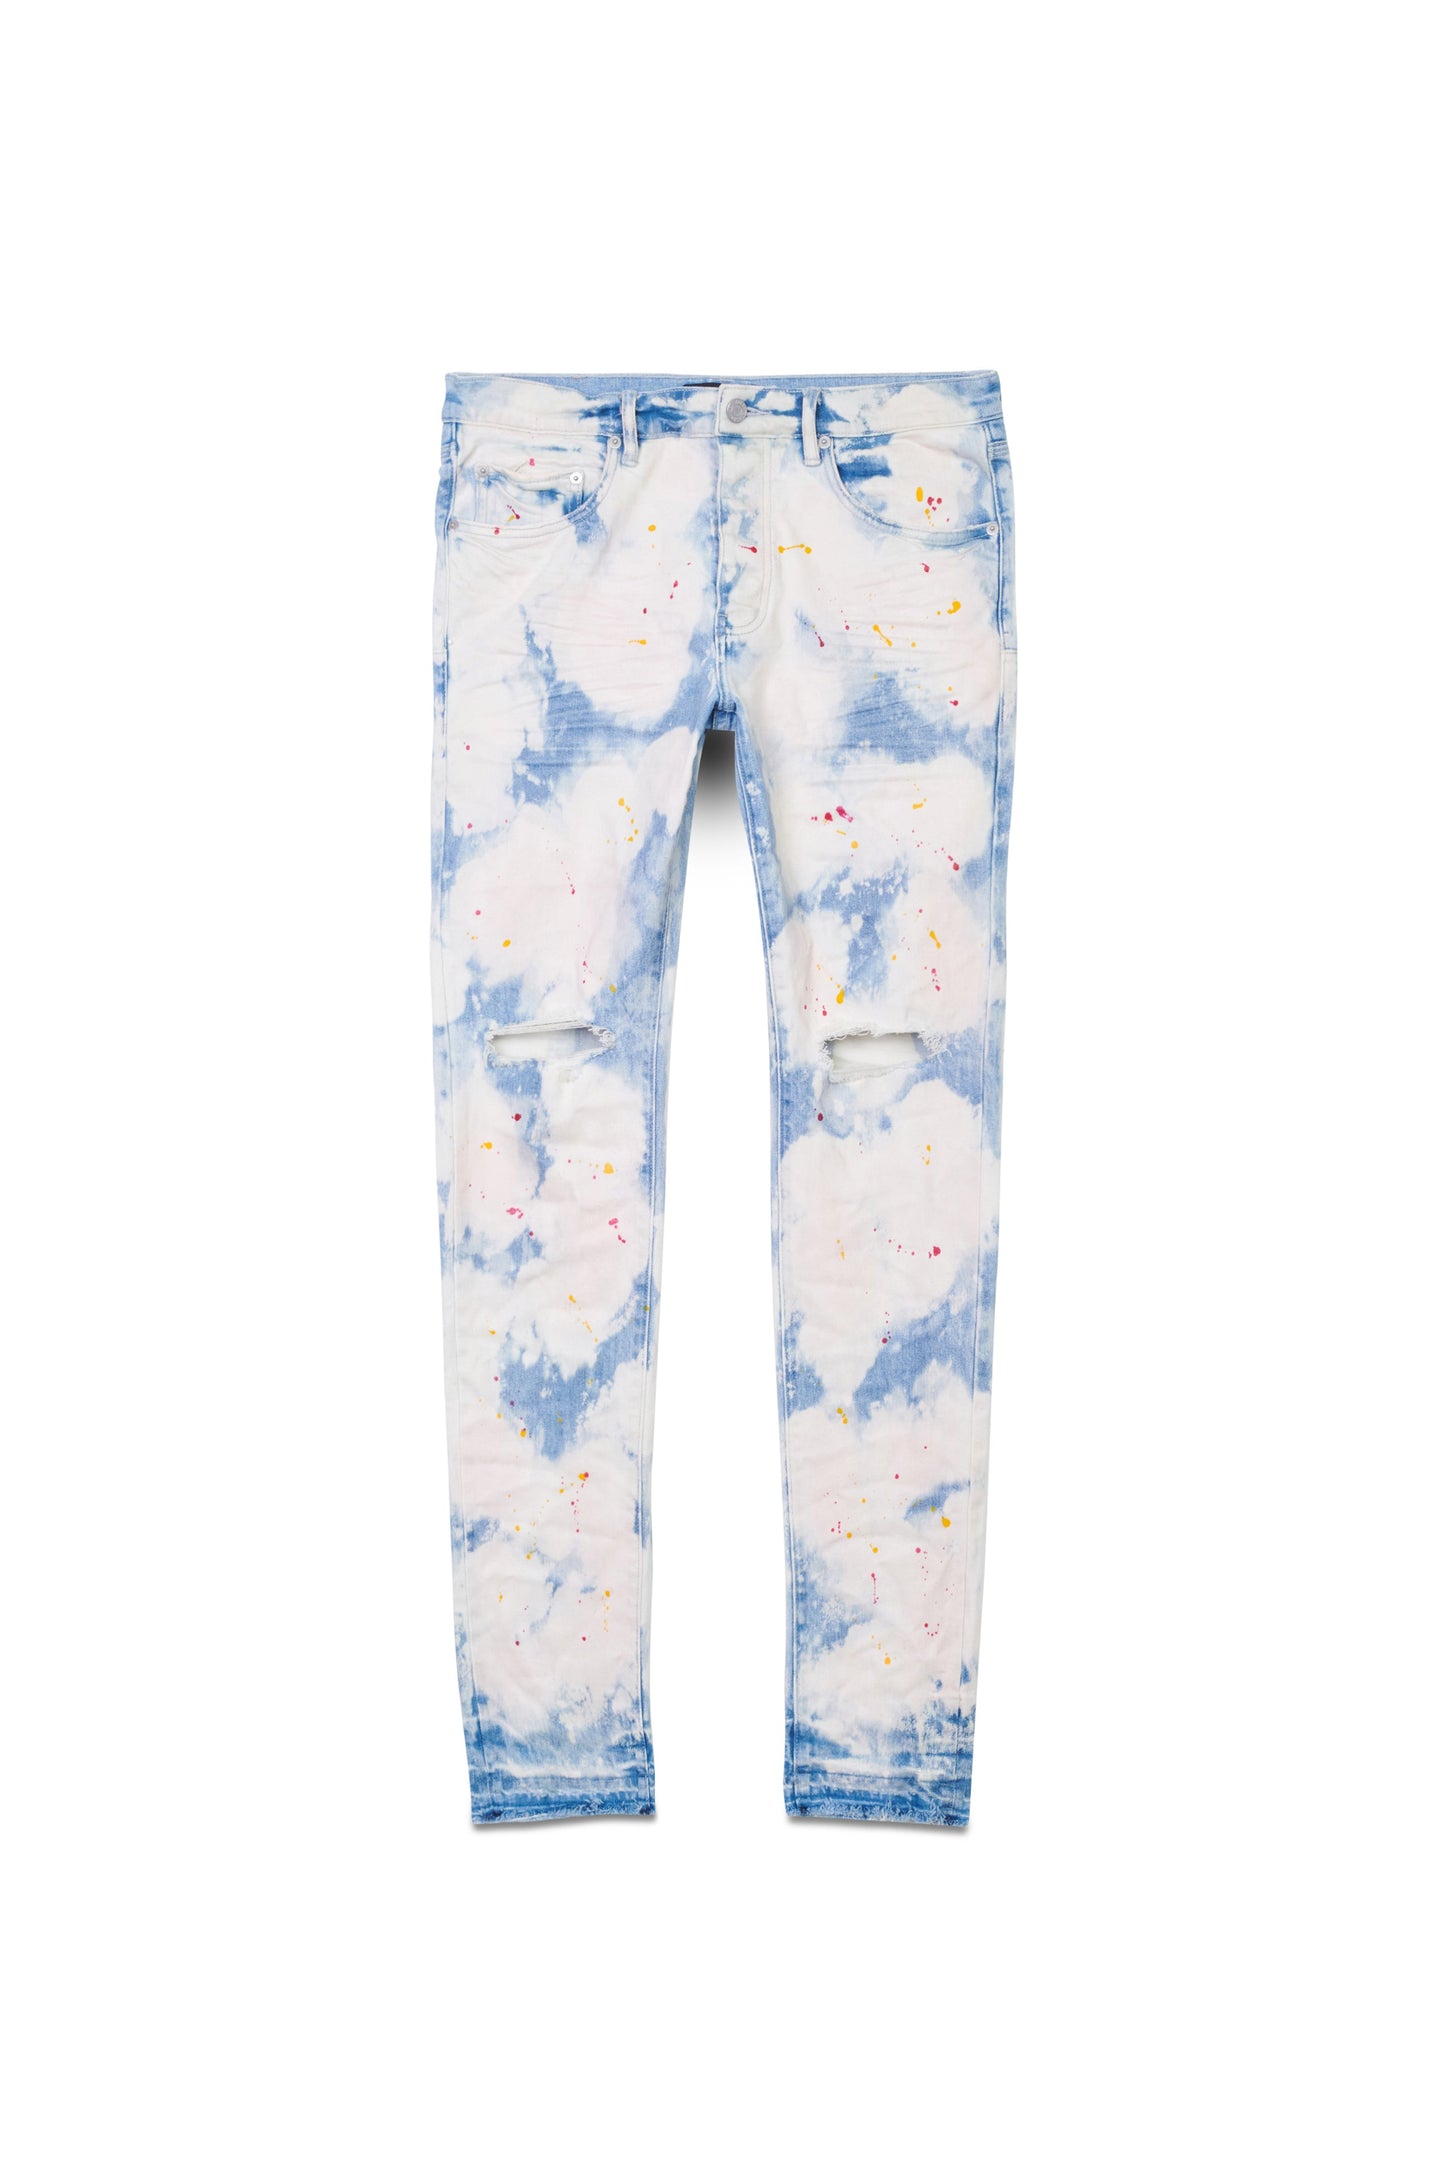 P001 LOW RISE SKINNY JEAN - Light Faded Indigo Bleached Out Splatter